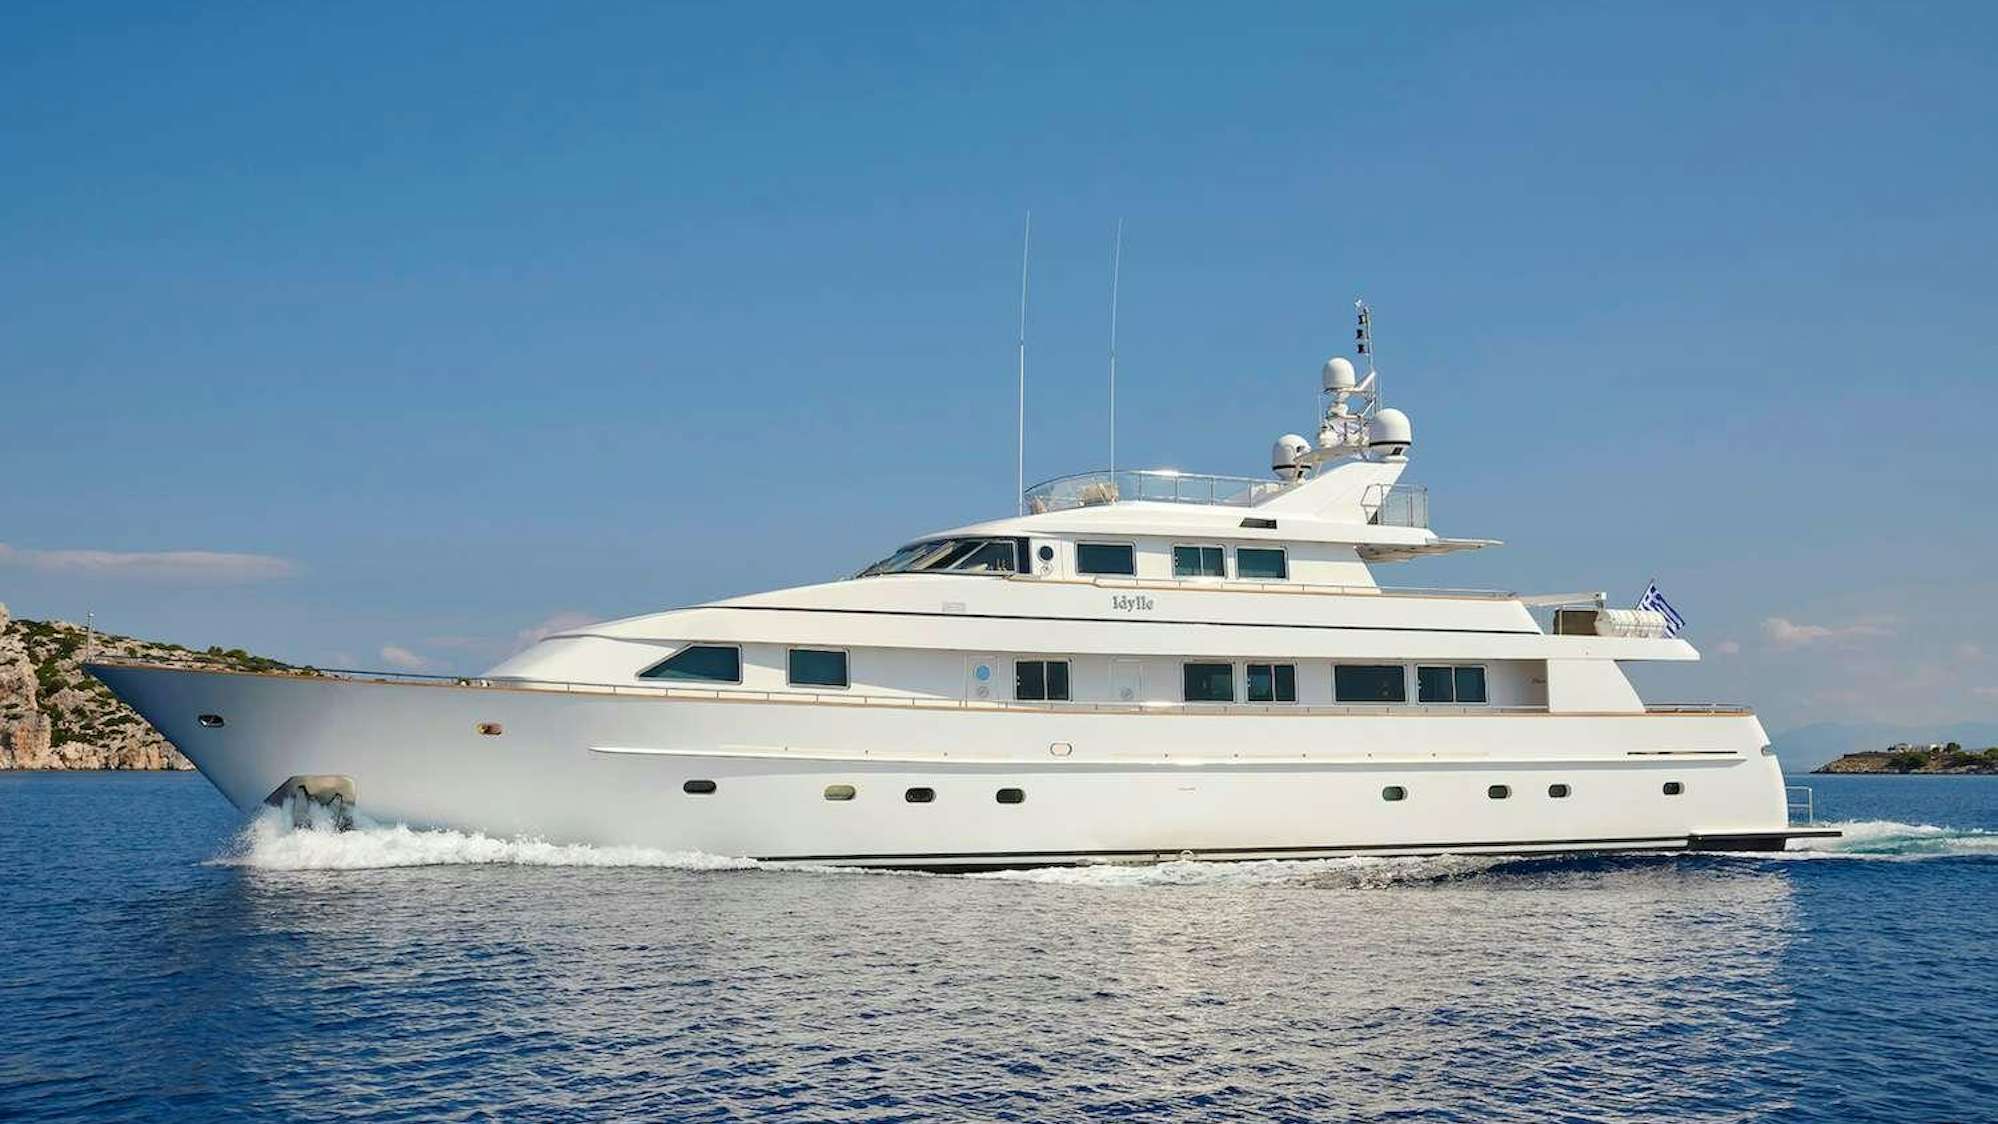 Watch Video for IDYLLE Yacht for Charter